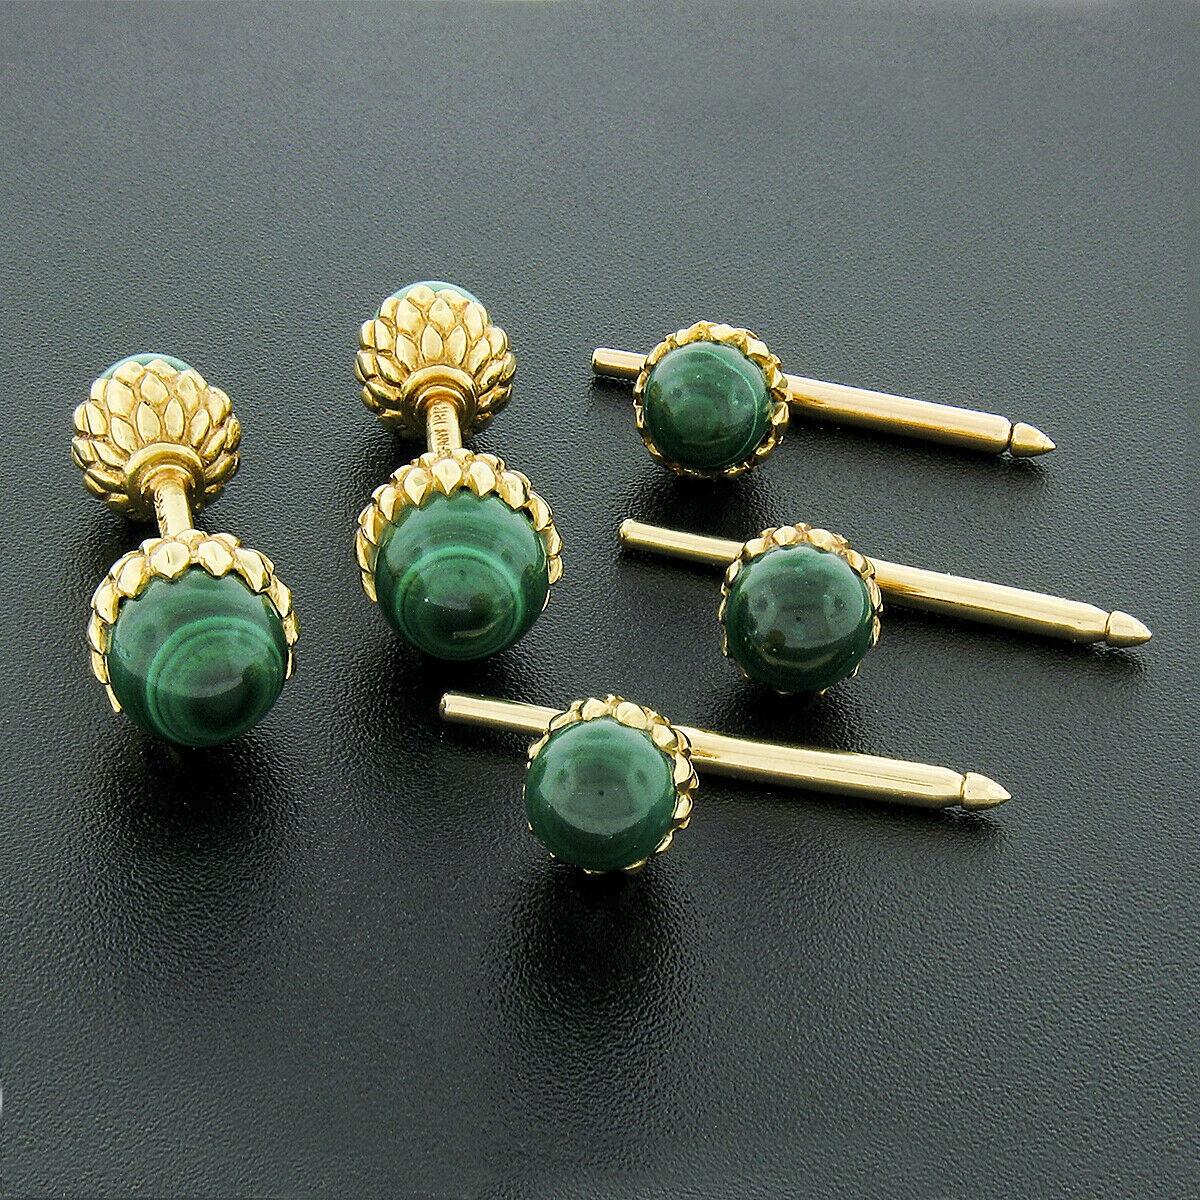 This gorgeous set of Tiffany & Co. cuff links and button stud set is designed by Schlumberger and crafted in solid 18k yellow gold. They feature the iconic Acorn design and are set with round bead, natural genuine malachite stones. The panels are